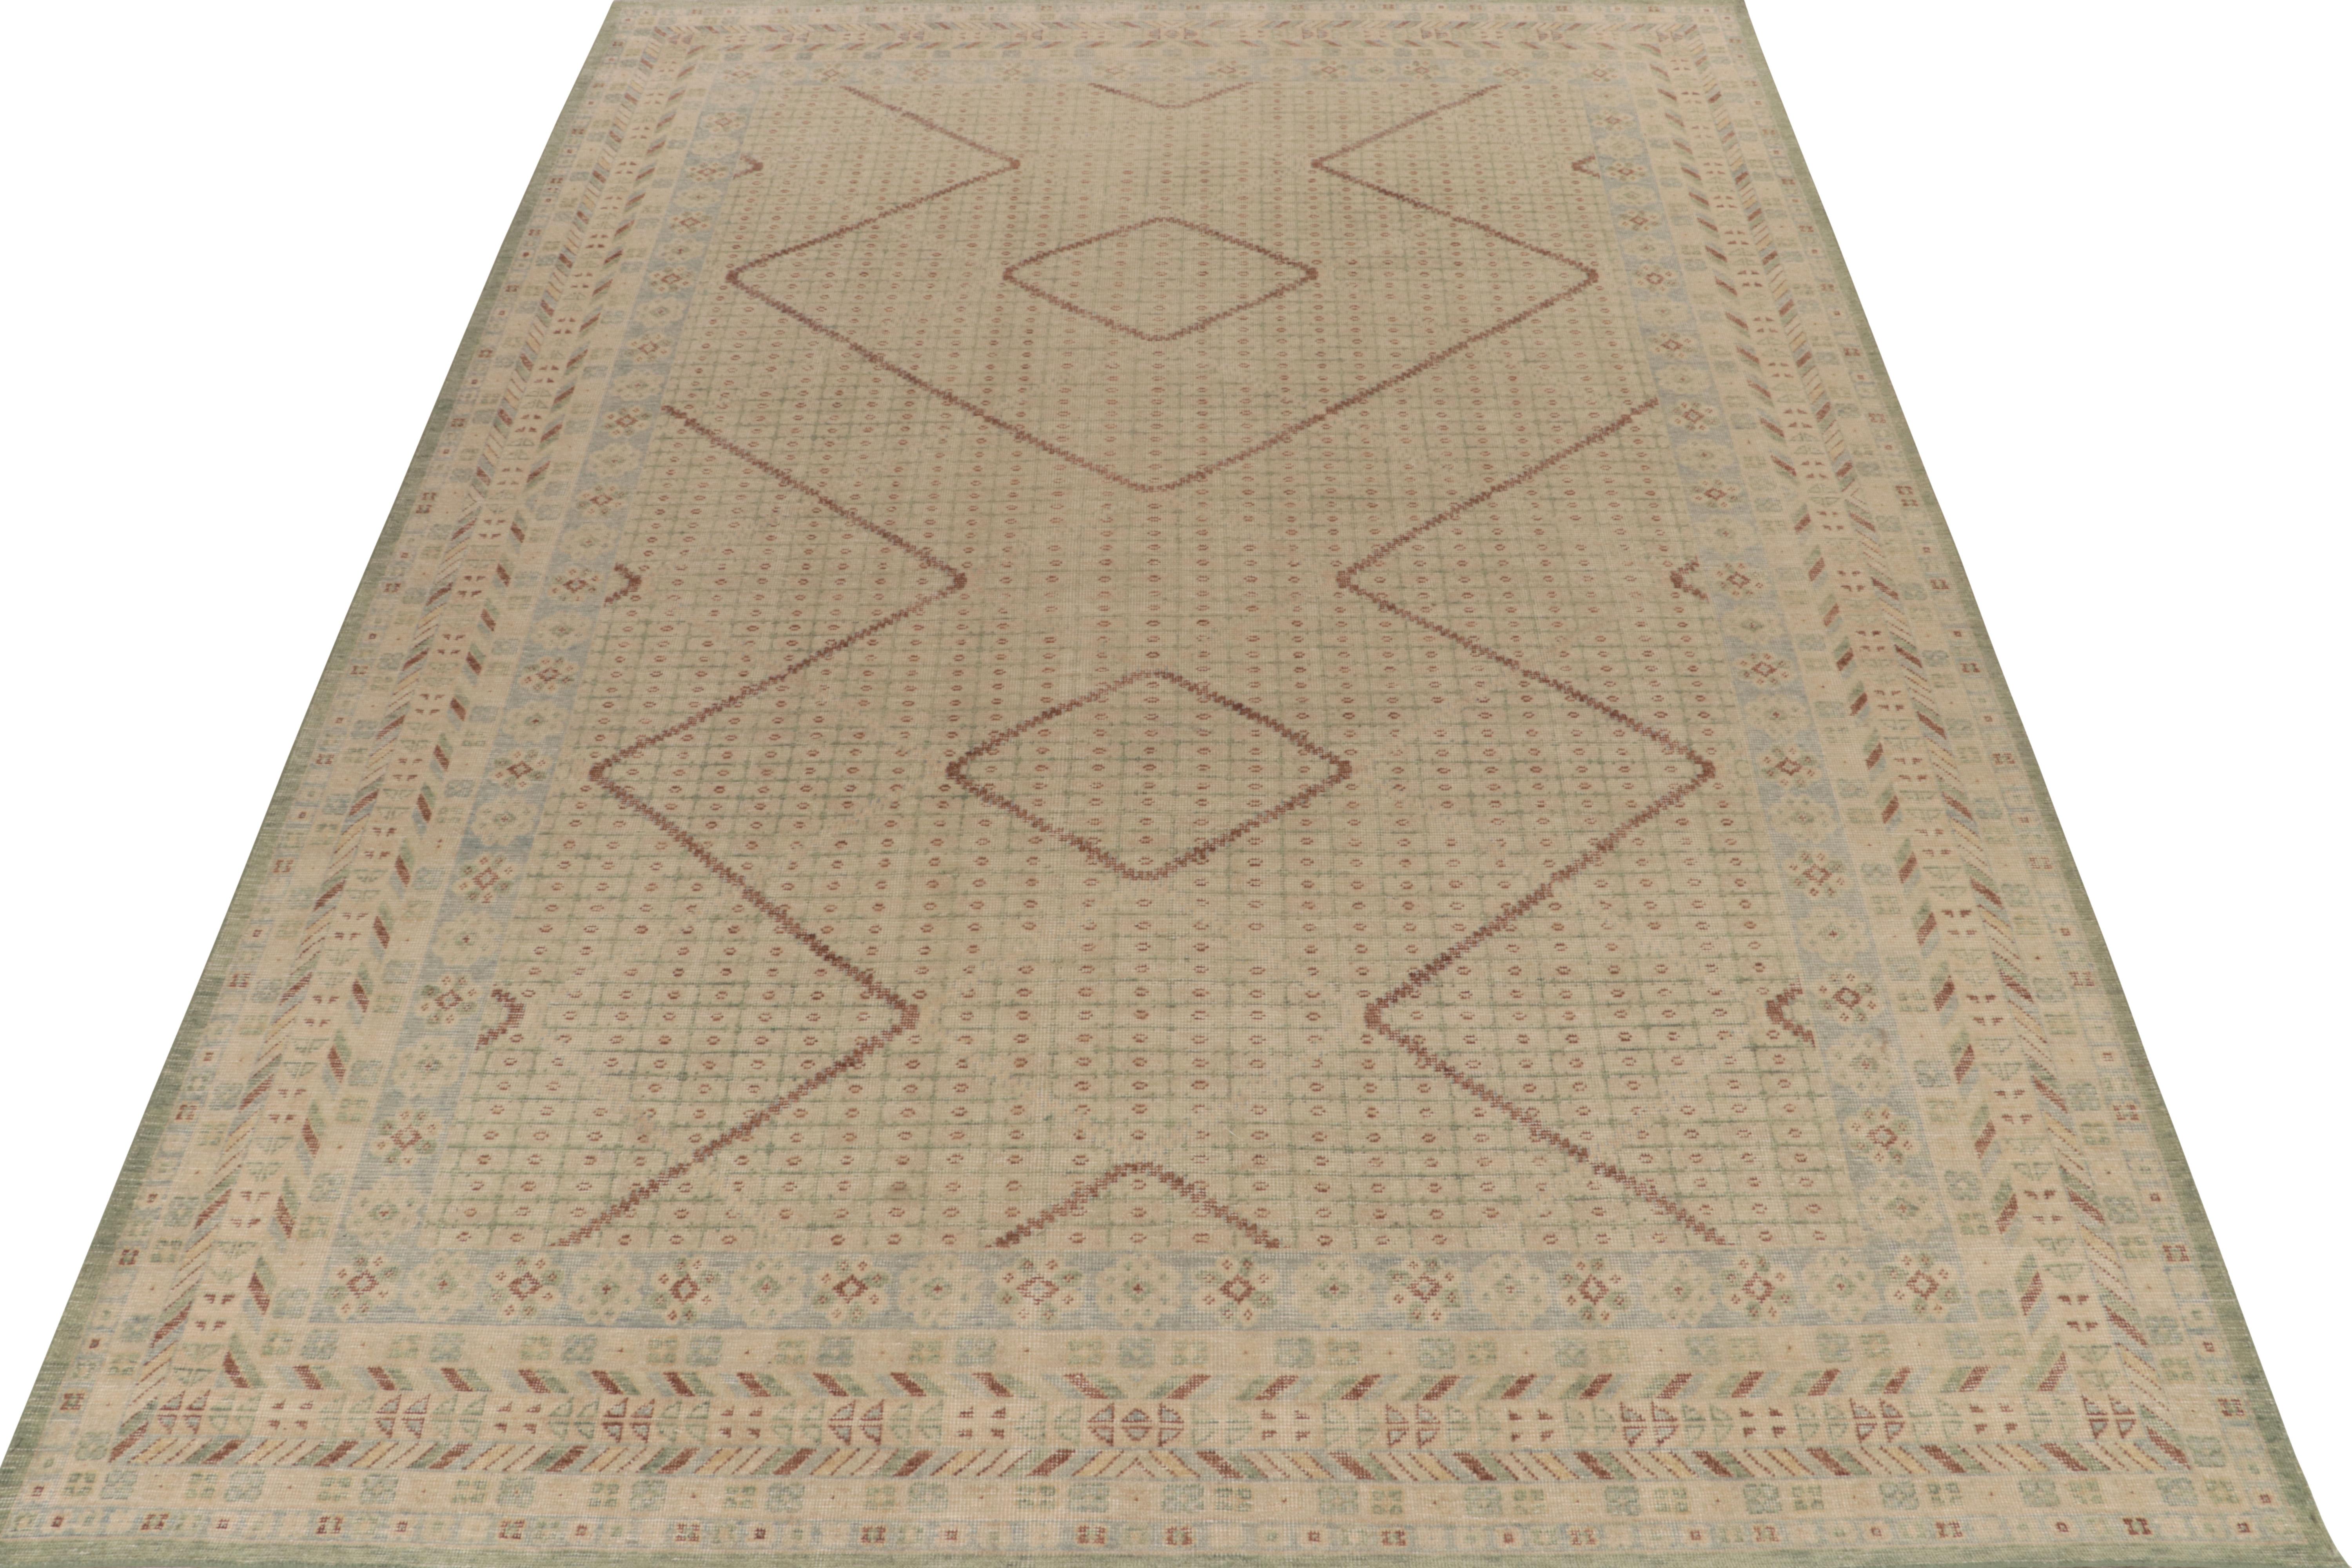 Indian Rug & Kilim’s Distressed Khotan Style Rug in Beige-Brown, Green and Blue Pattern For Sale